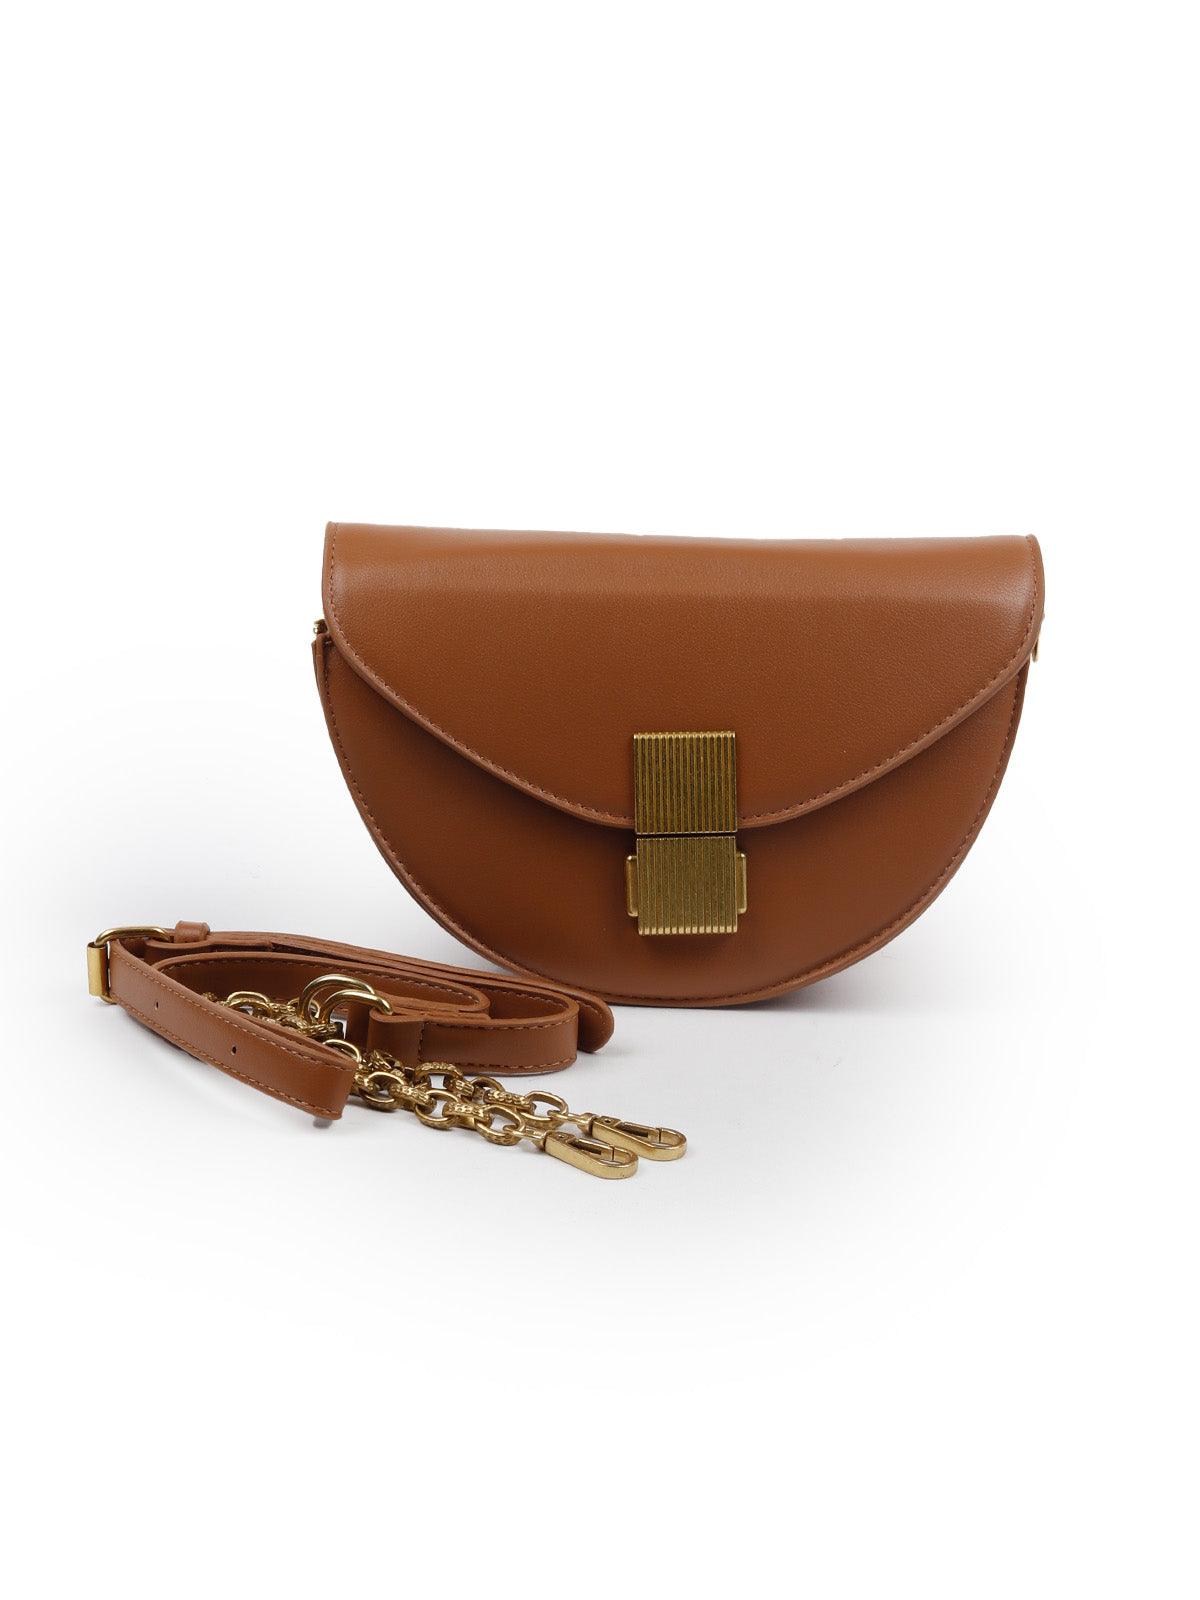 THE VERY STYLISH BROWN CLUTCH BAG - Odette